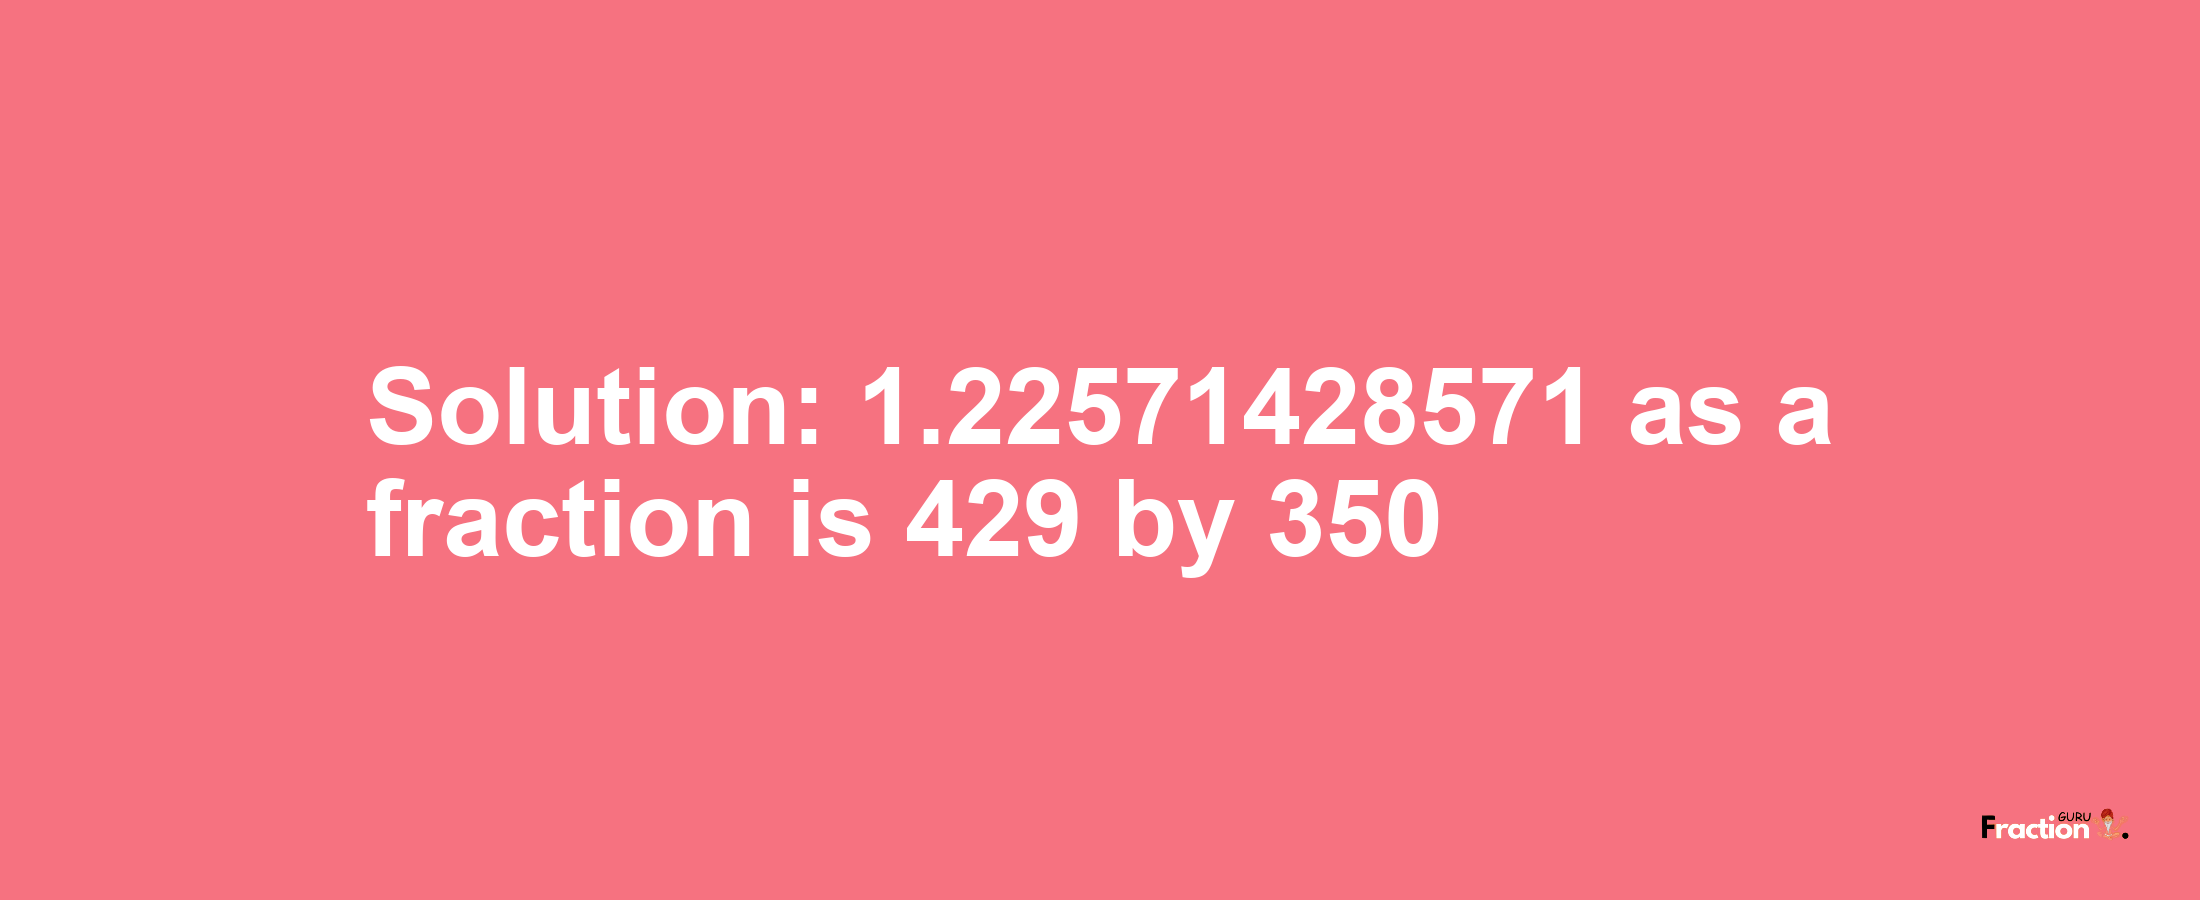 Solution:1.22571428571 as a fraction is 429/350